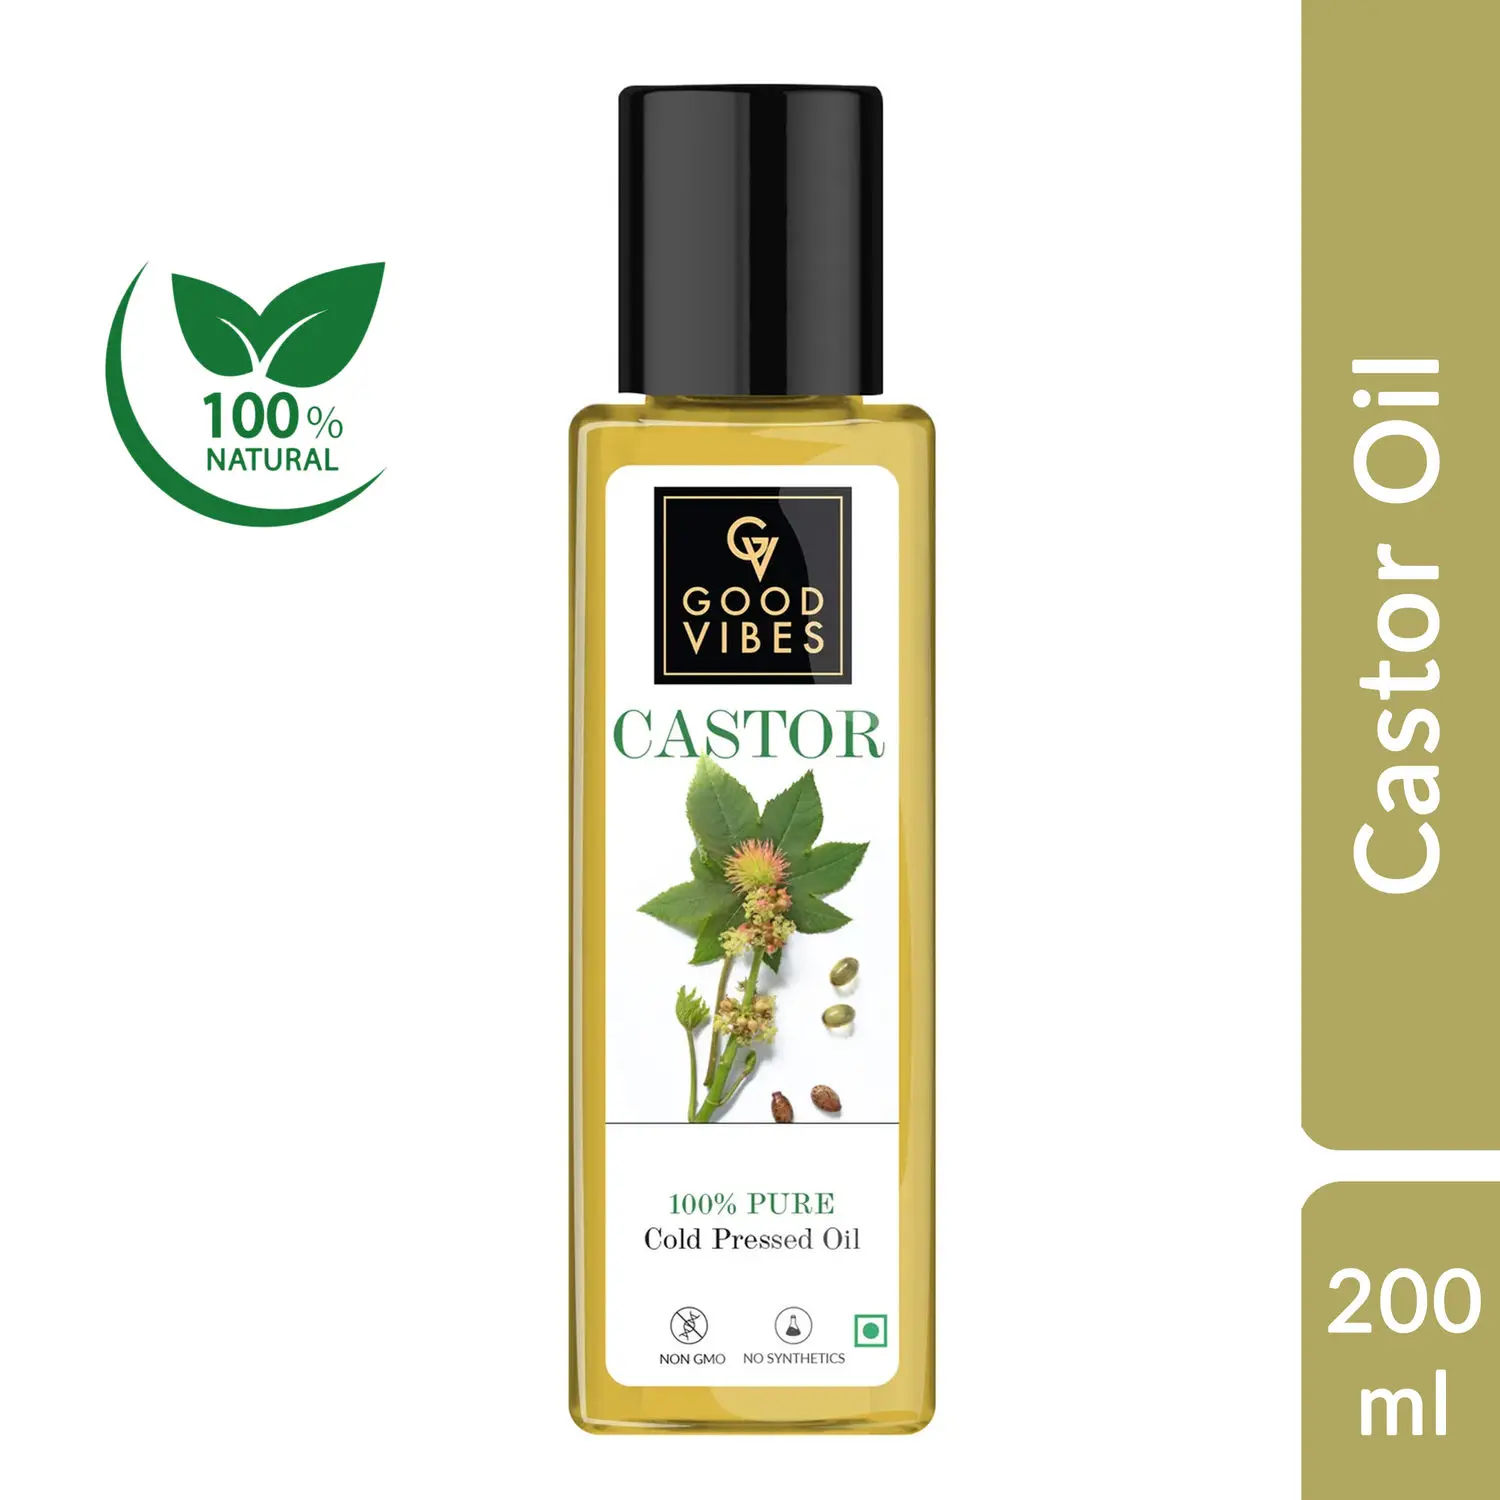 Good Vibes Castor 100% Pure Cold Pressed Oil For Hair & Skin | Moisturizing, Hair Growth | No Parabens, No Sulphates, No Mineral Oil (200 ml)